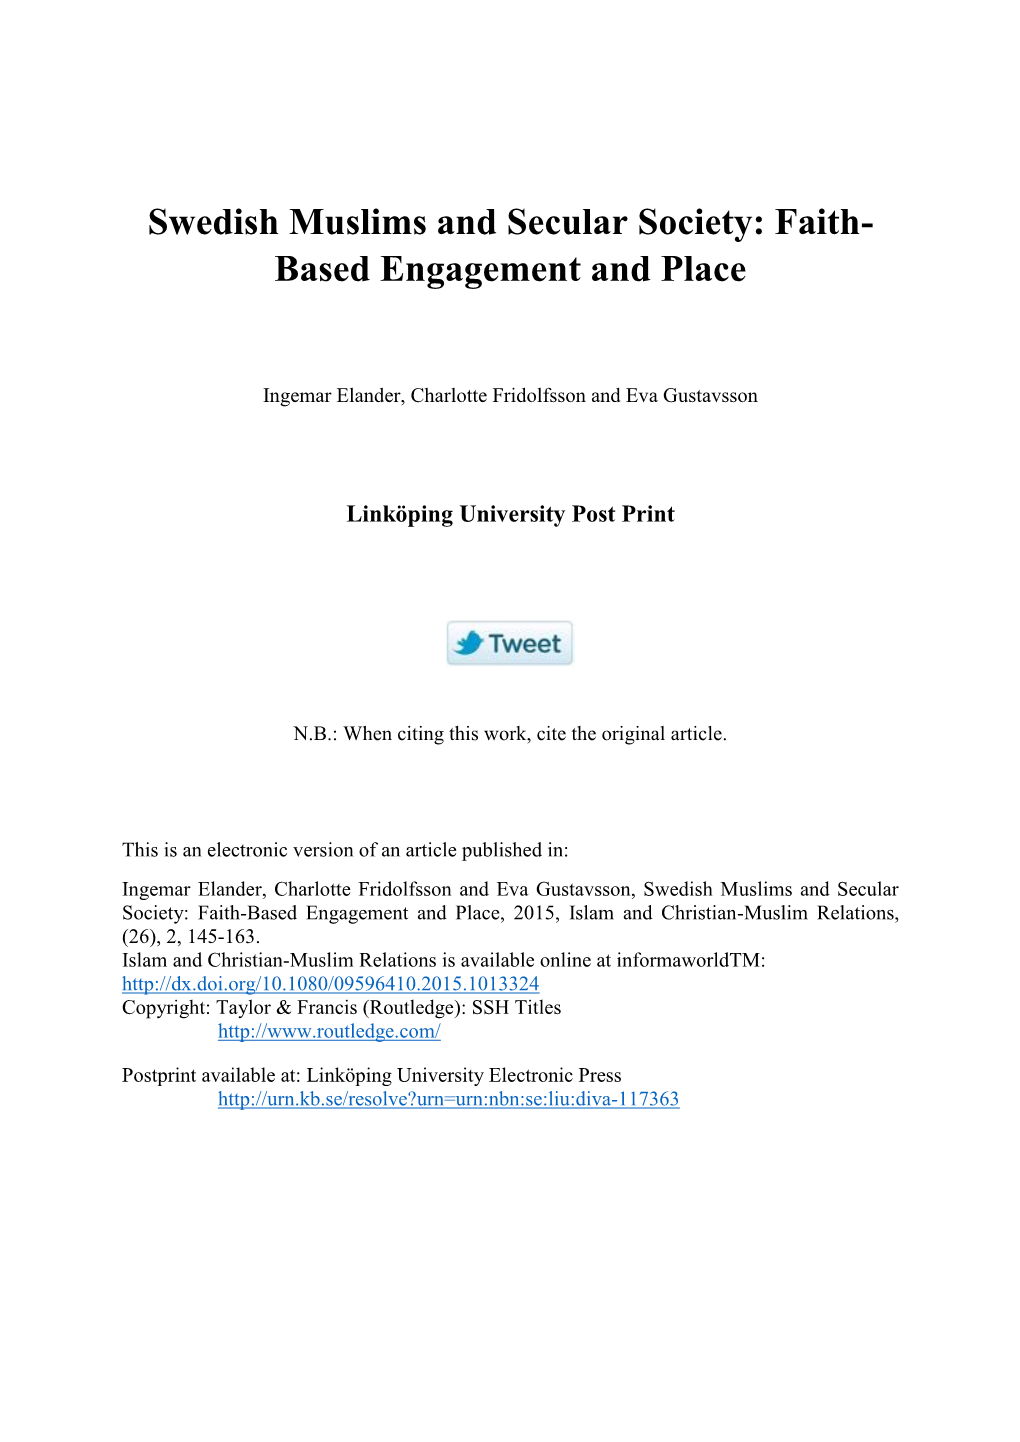 Swedish Muslims and Secular Society: Faith- Based Engagement and Place